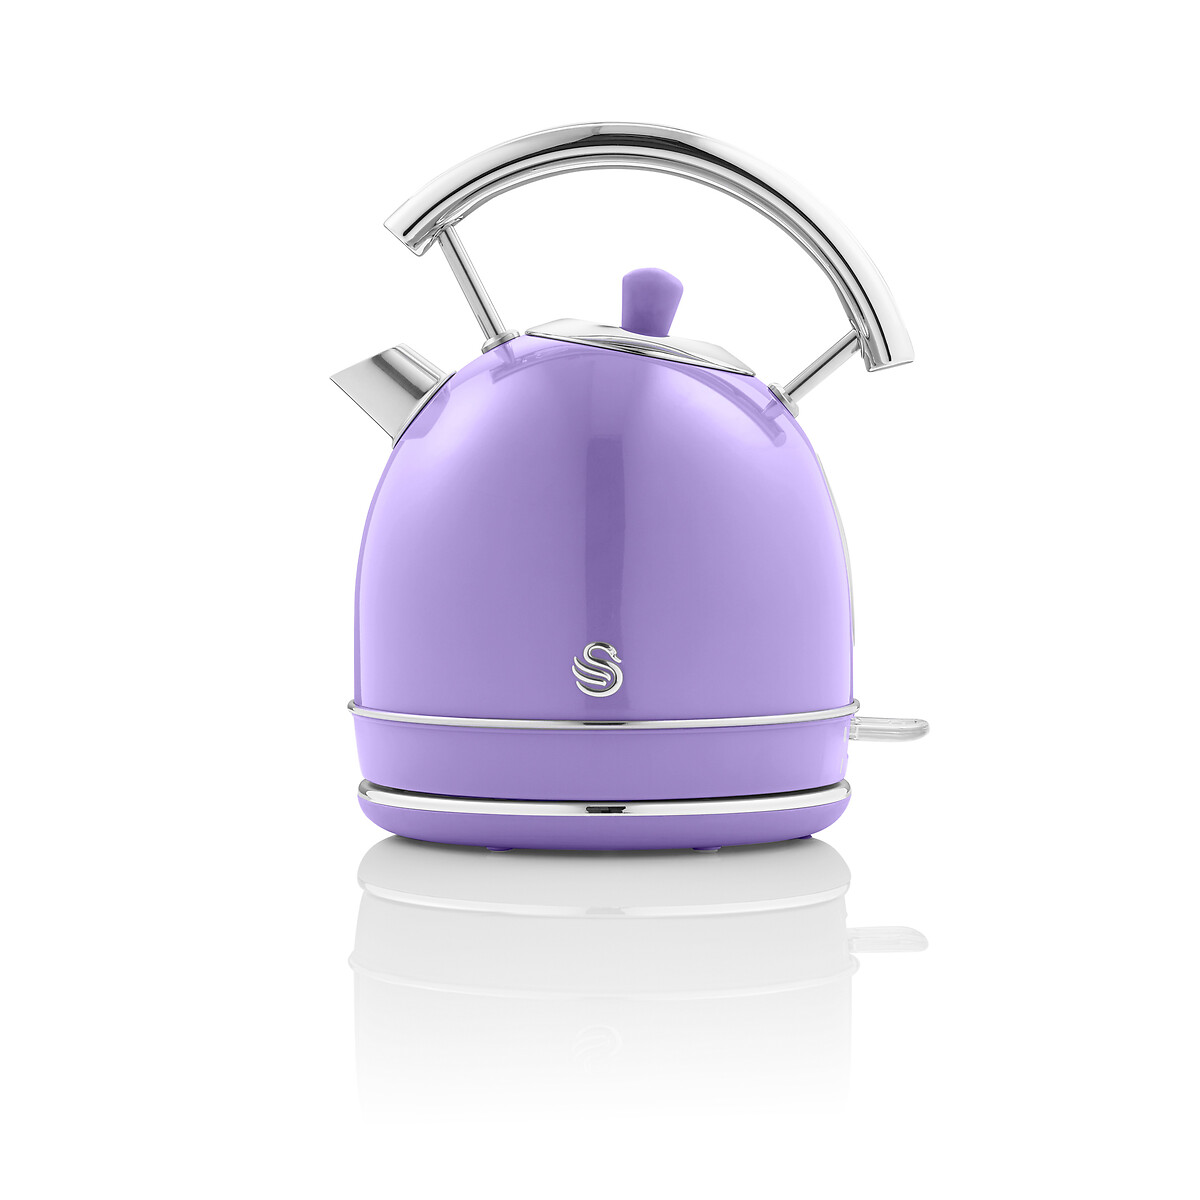 4 Slice Toaster, Retro Kitchen Kettle and Toaster Set Swan 1.8L Dome Kettle Green 